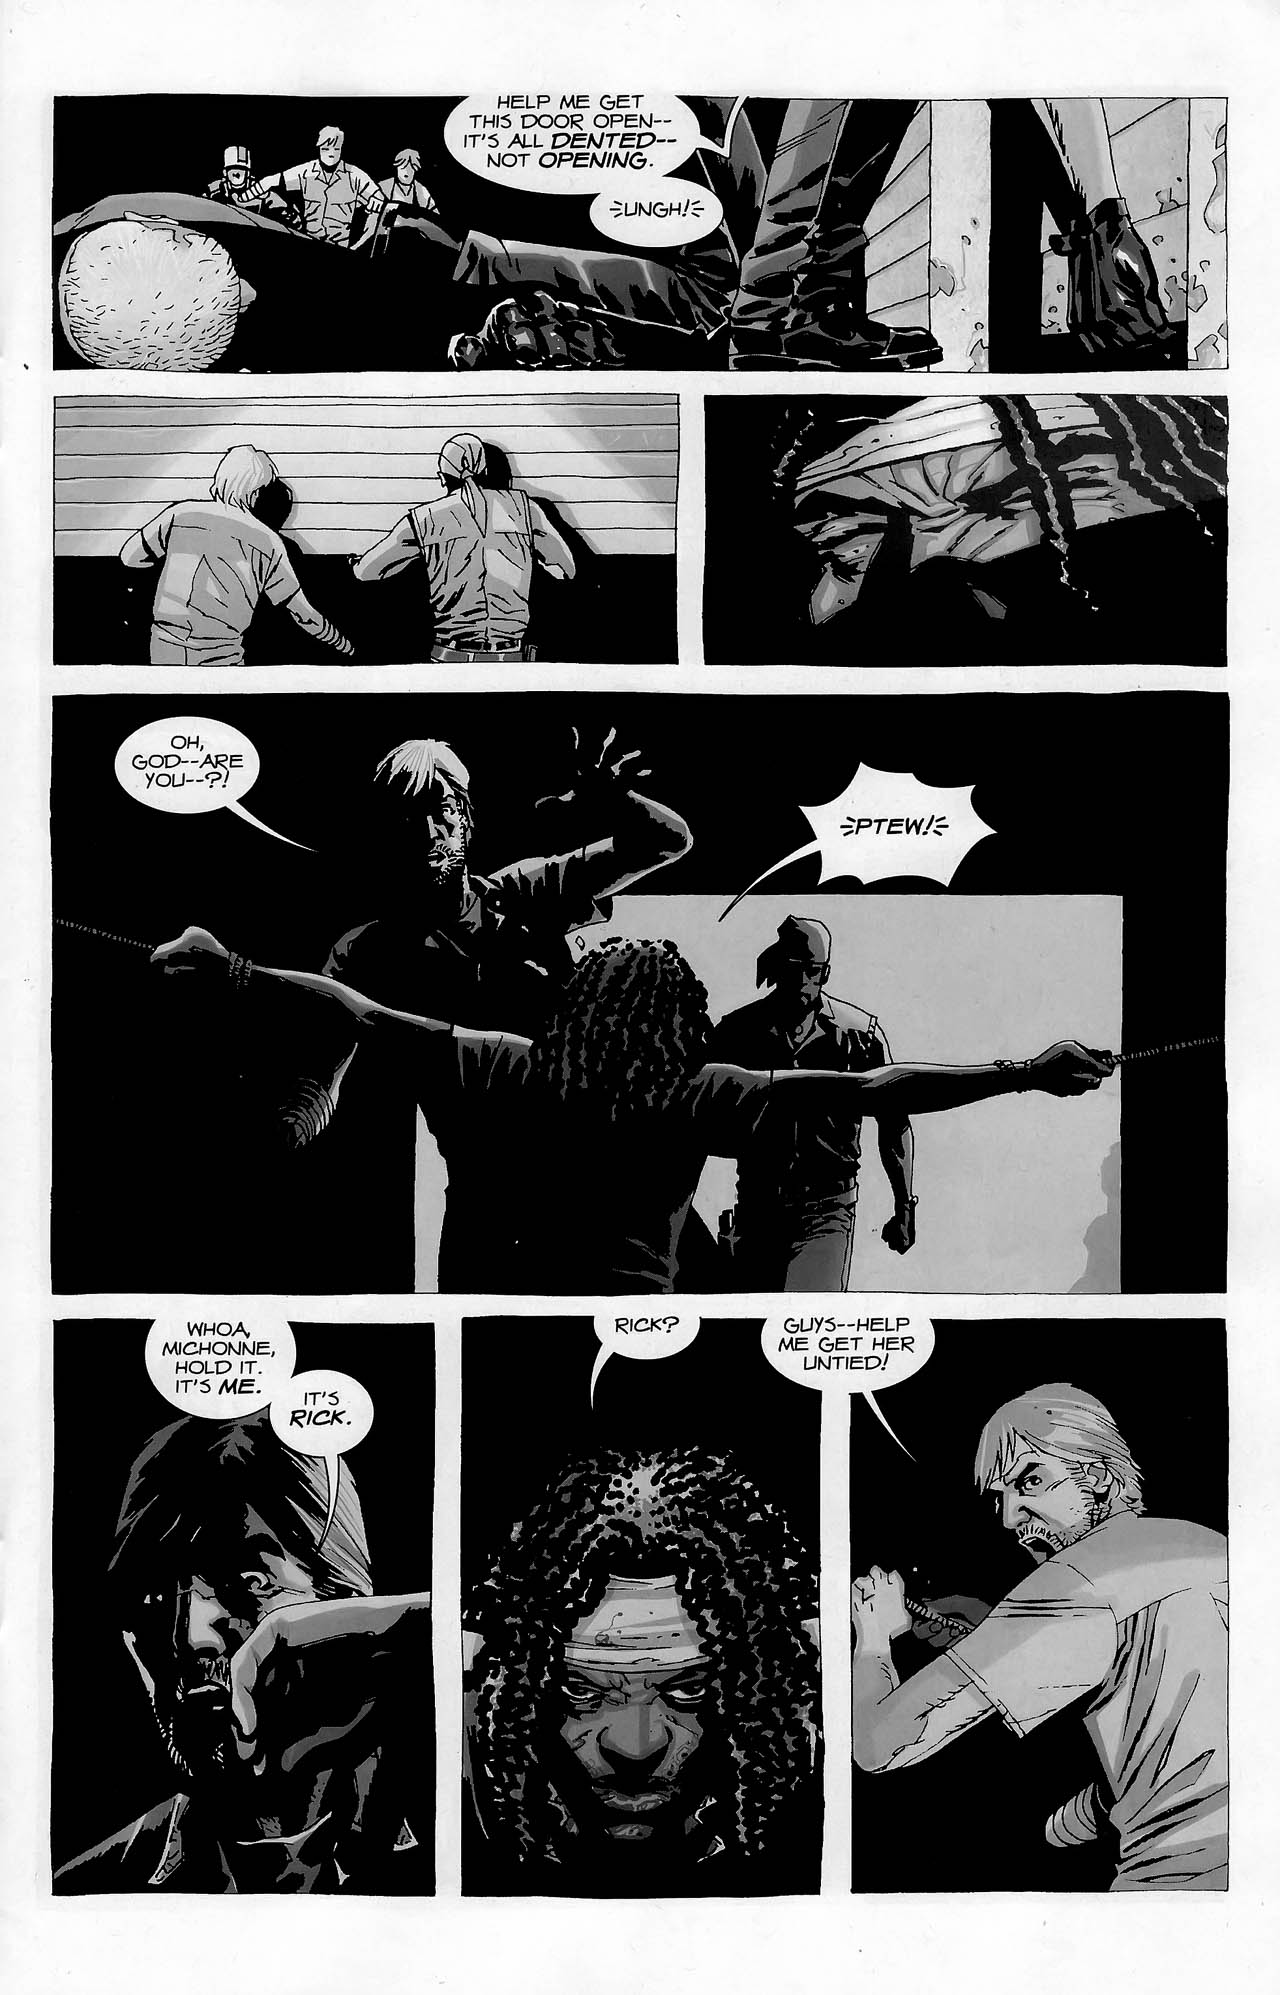 comics - Help Me Get This Door Open It'S All Dented Not Opening. Ungh! Mil Oh, GodAre You?? Ptew! Rick? Whoa Michonne, Hold It. It'S Me. GuysHelp Me Get Her Untied! It'S Rick, 13